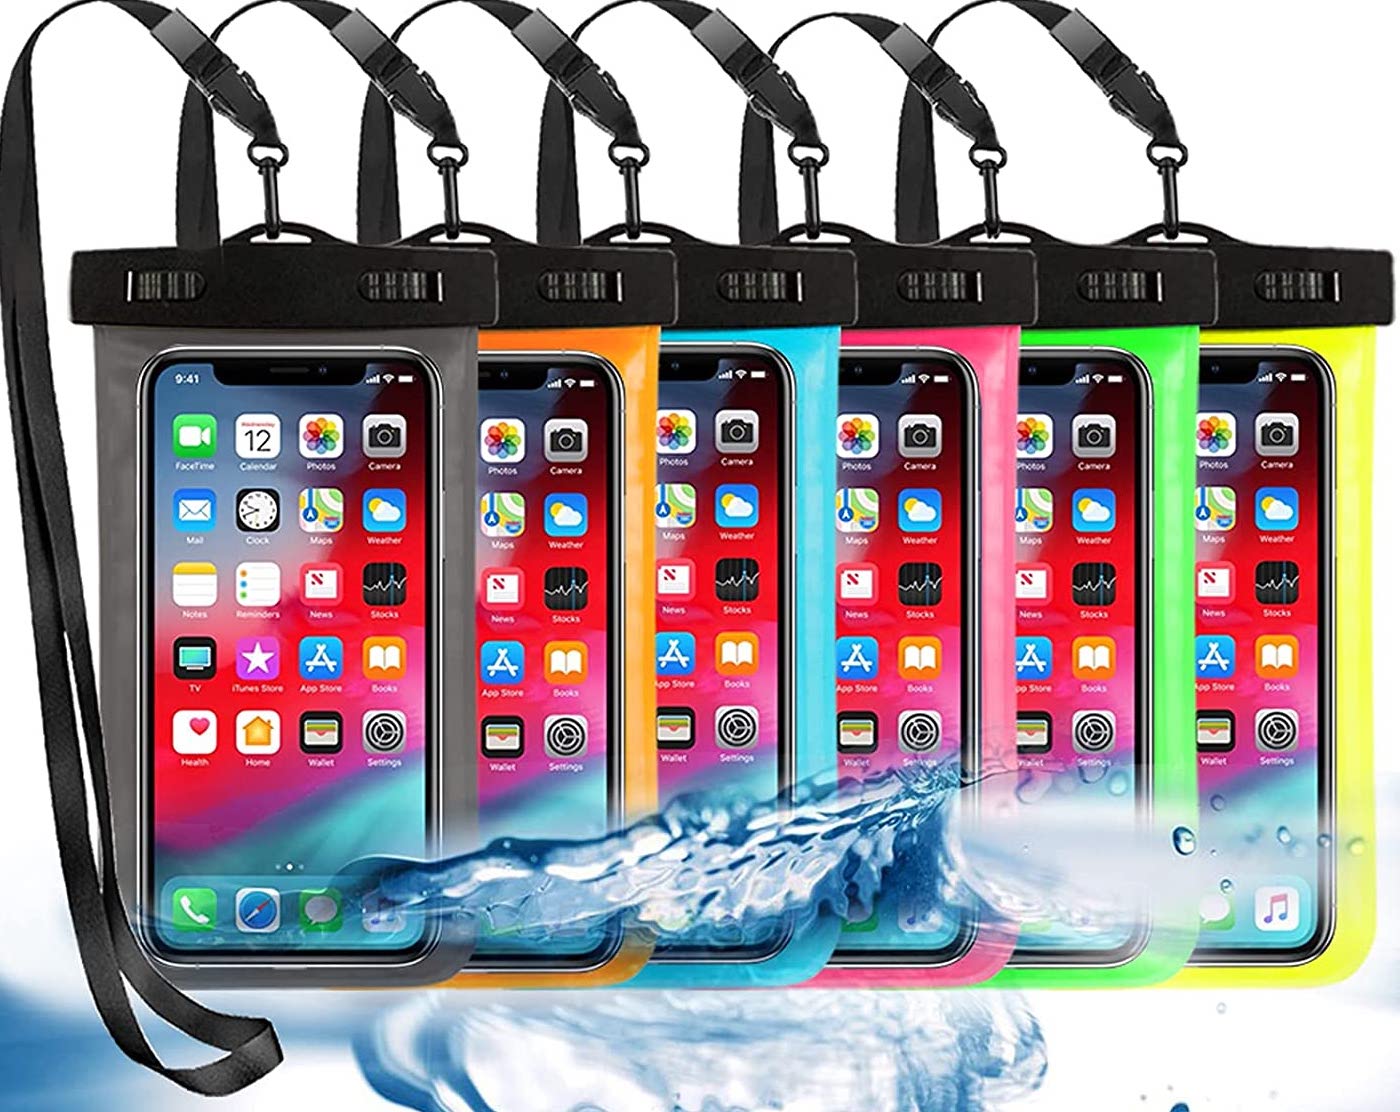 Famaboy Waterproof Iphone Pouch Render Cropped